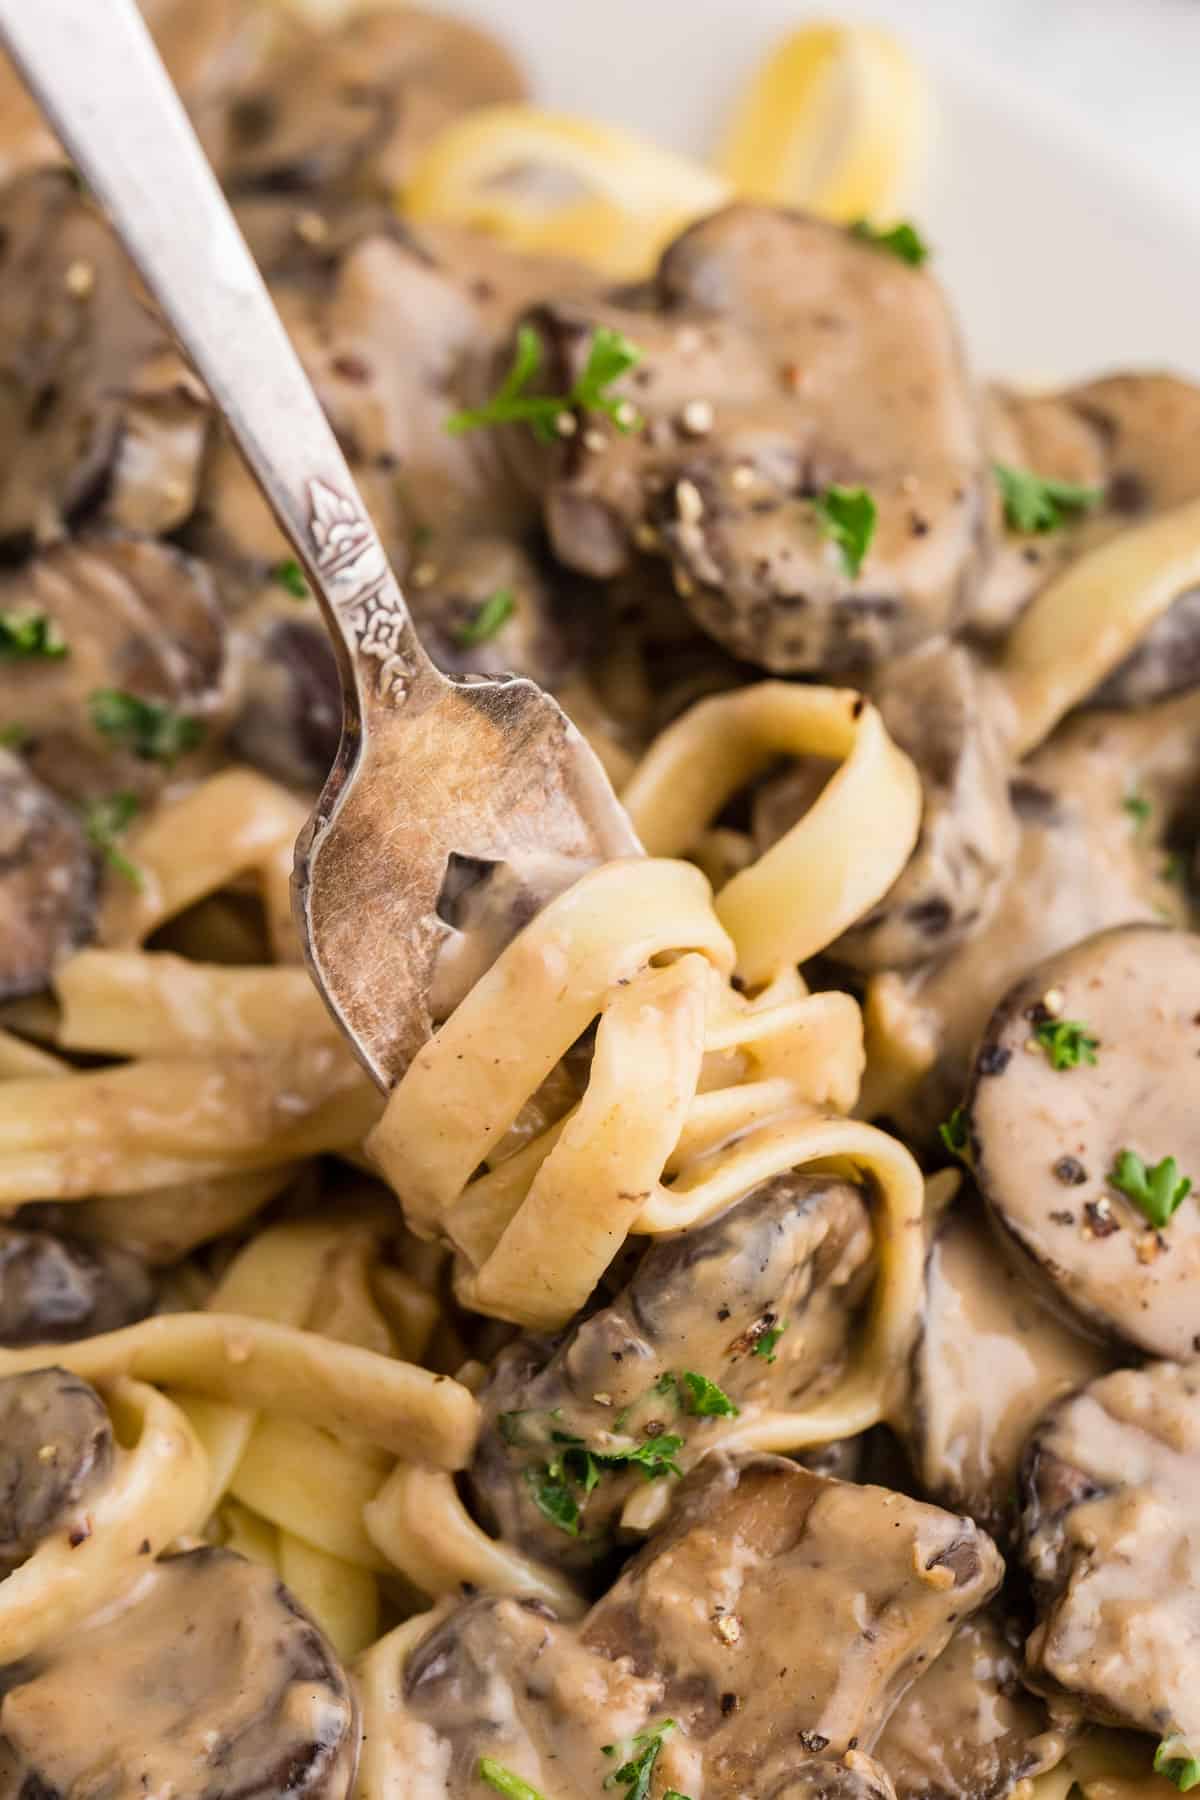 A fork of pasta and mushroom sauce.